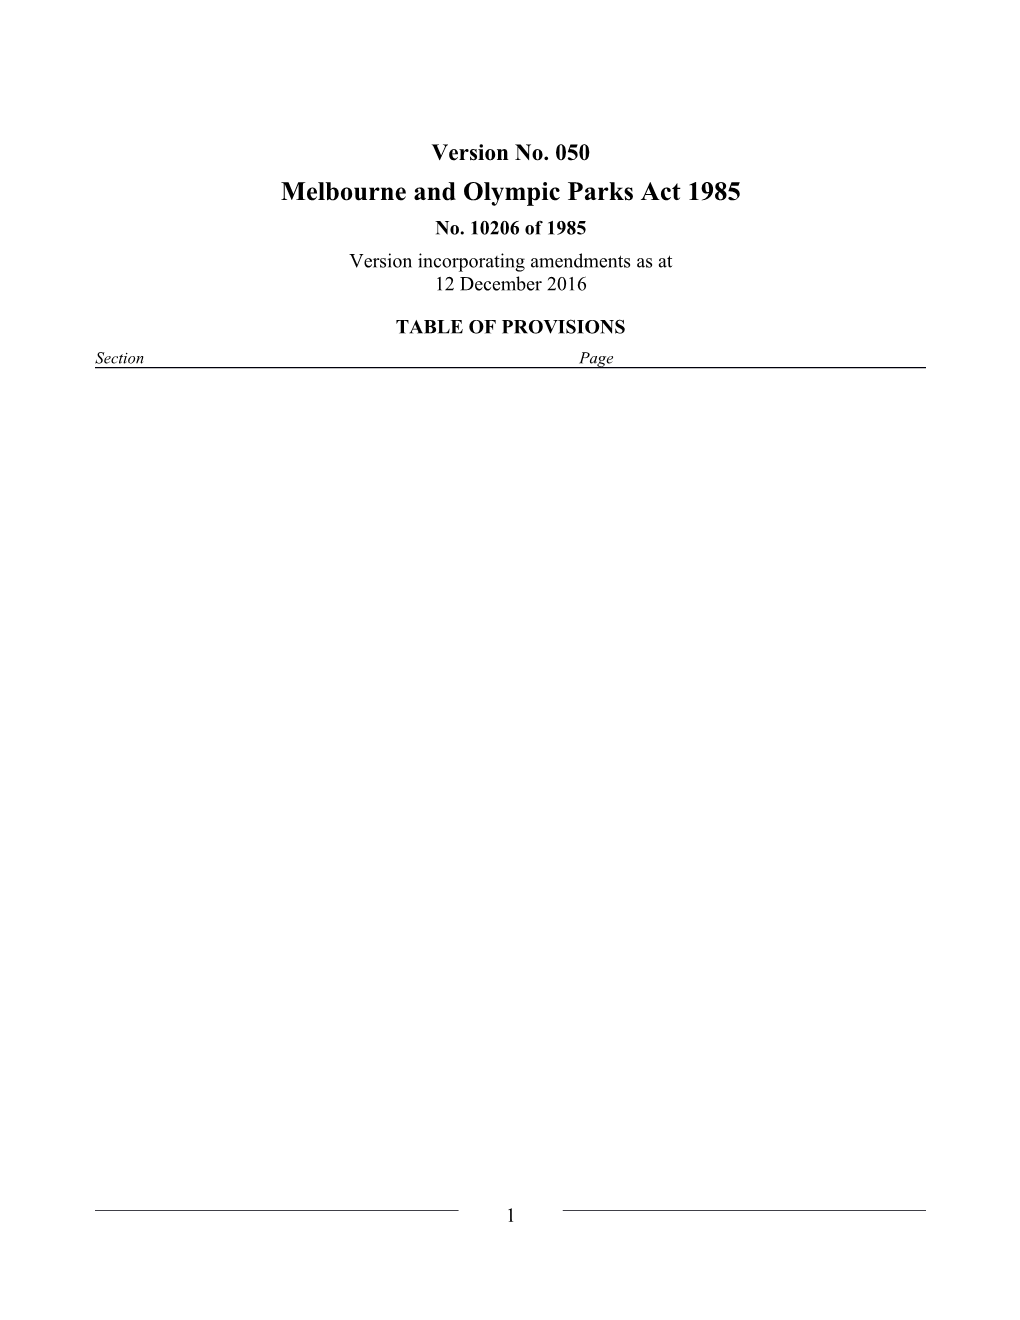 Melbourne and Olympic Parks Act 1985